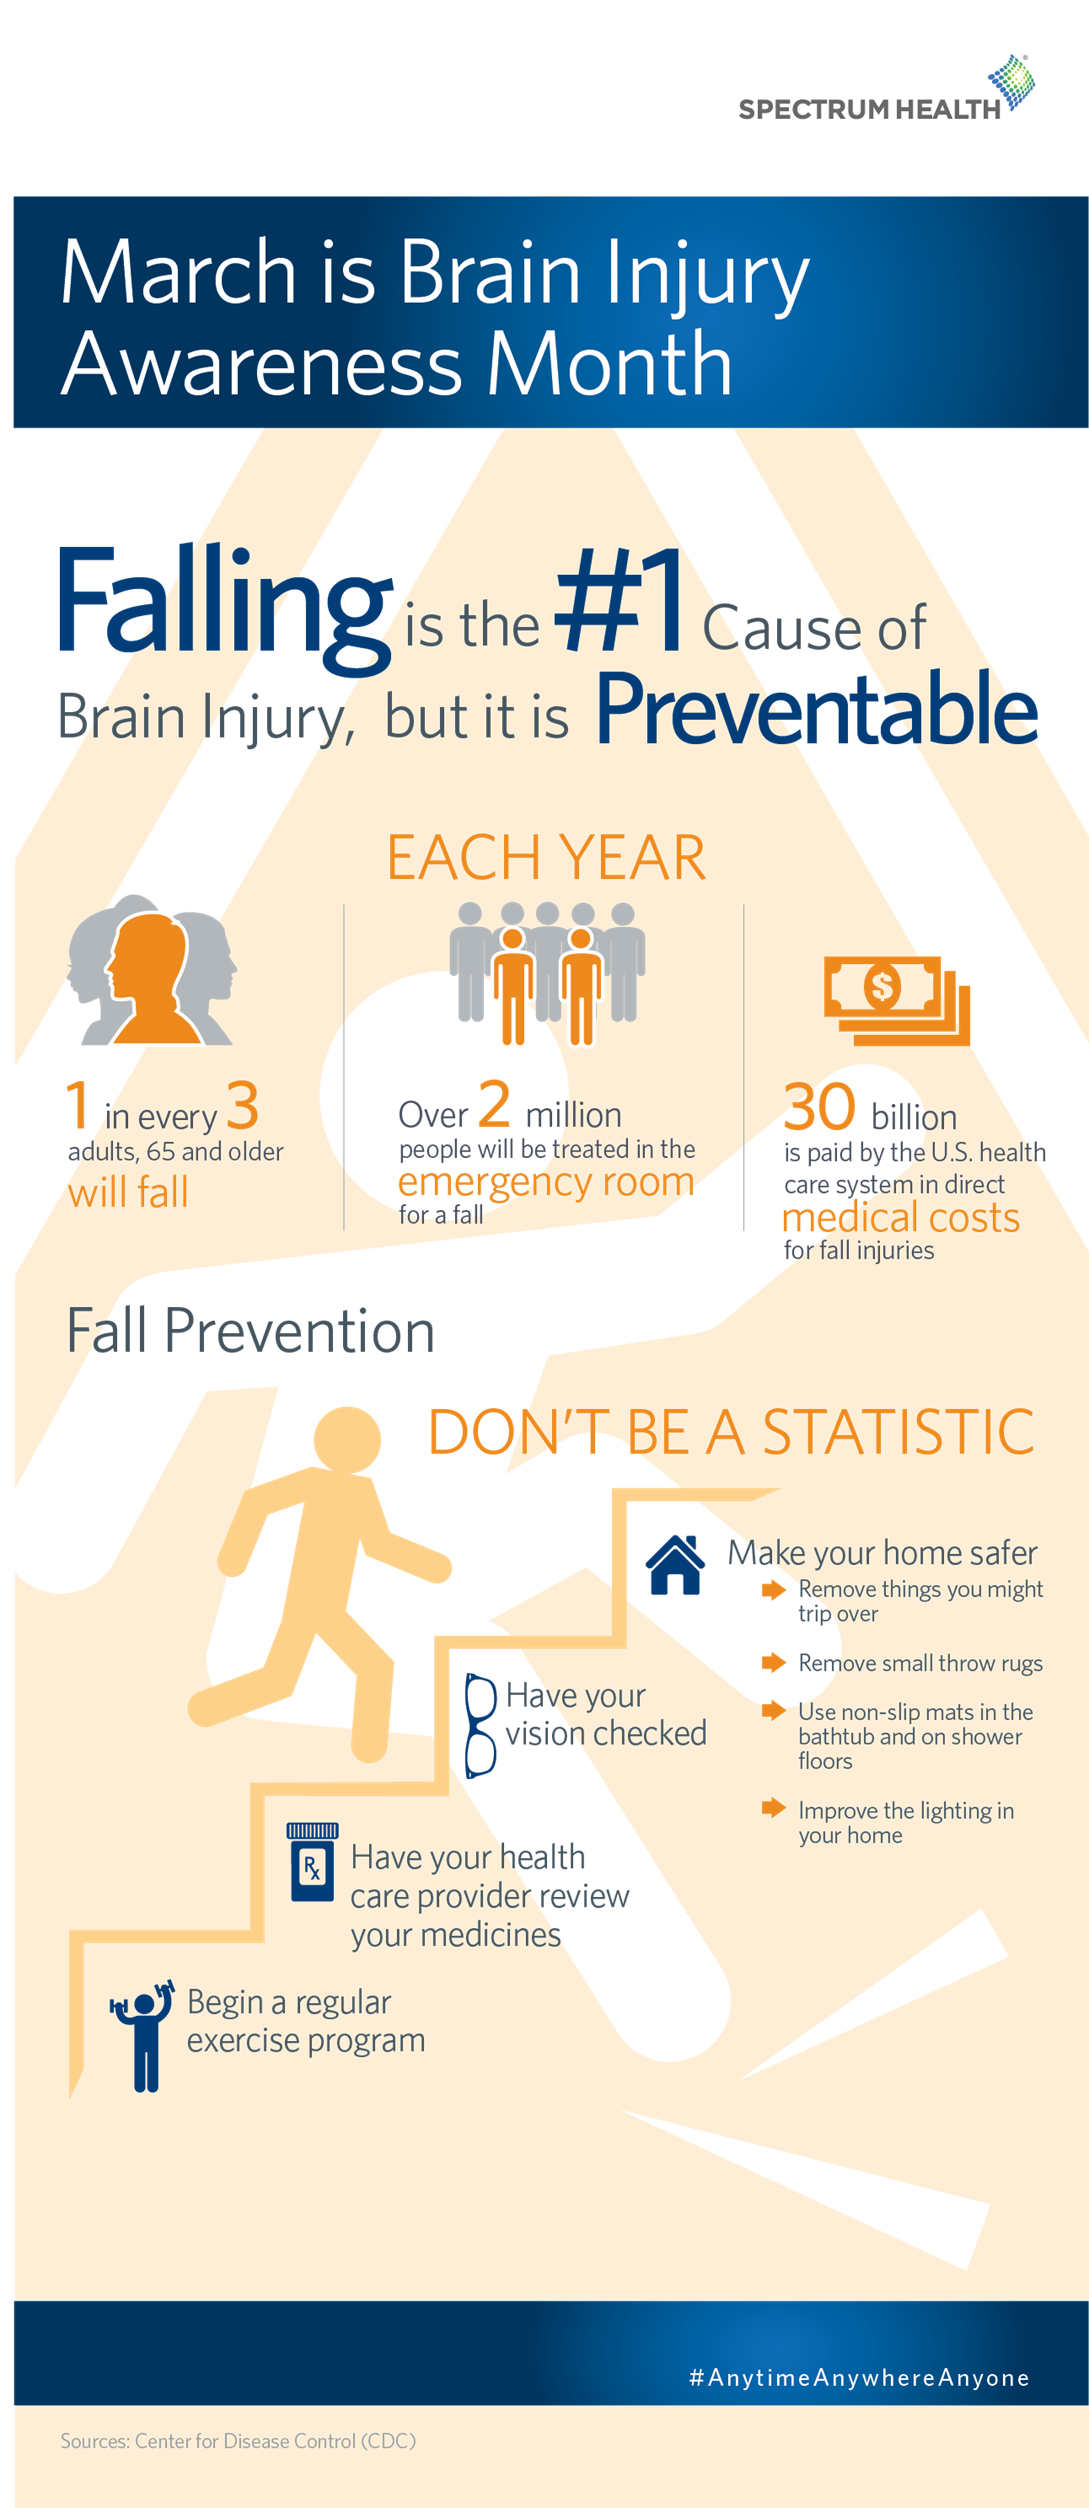 Prevent Falls from Happening